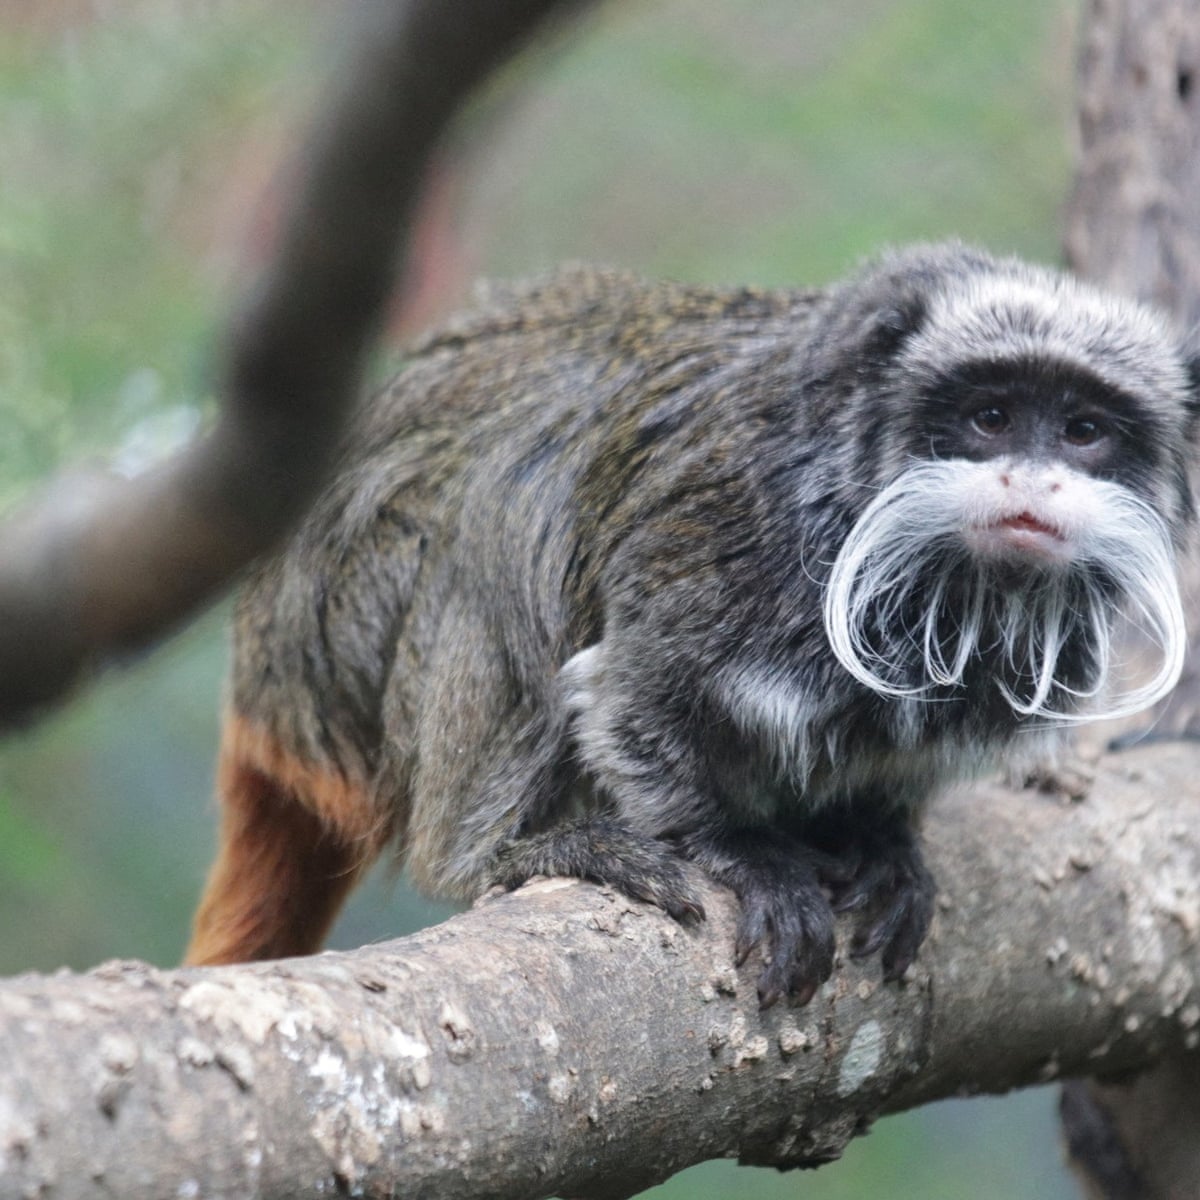 Dallas man arrested in case of monkeys missing from zoo plagued by  incidents | Dallas | The Guardian